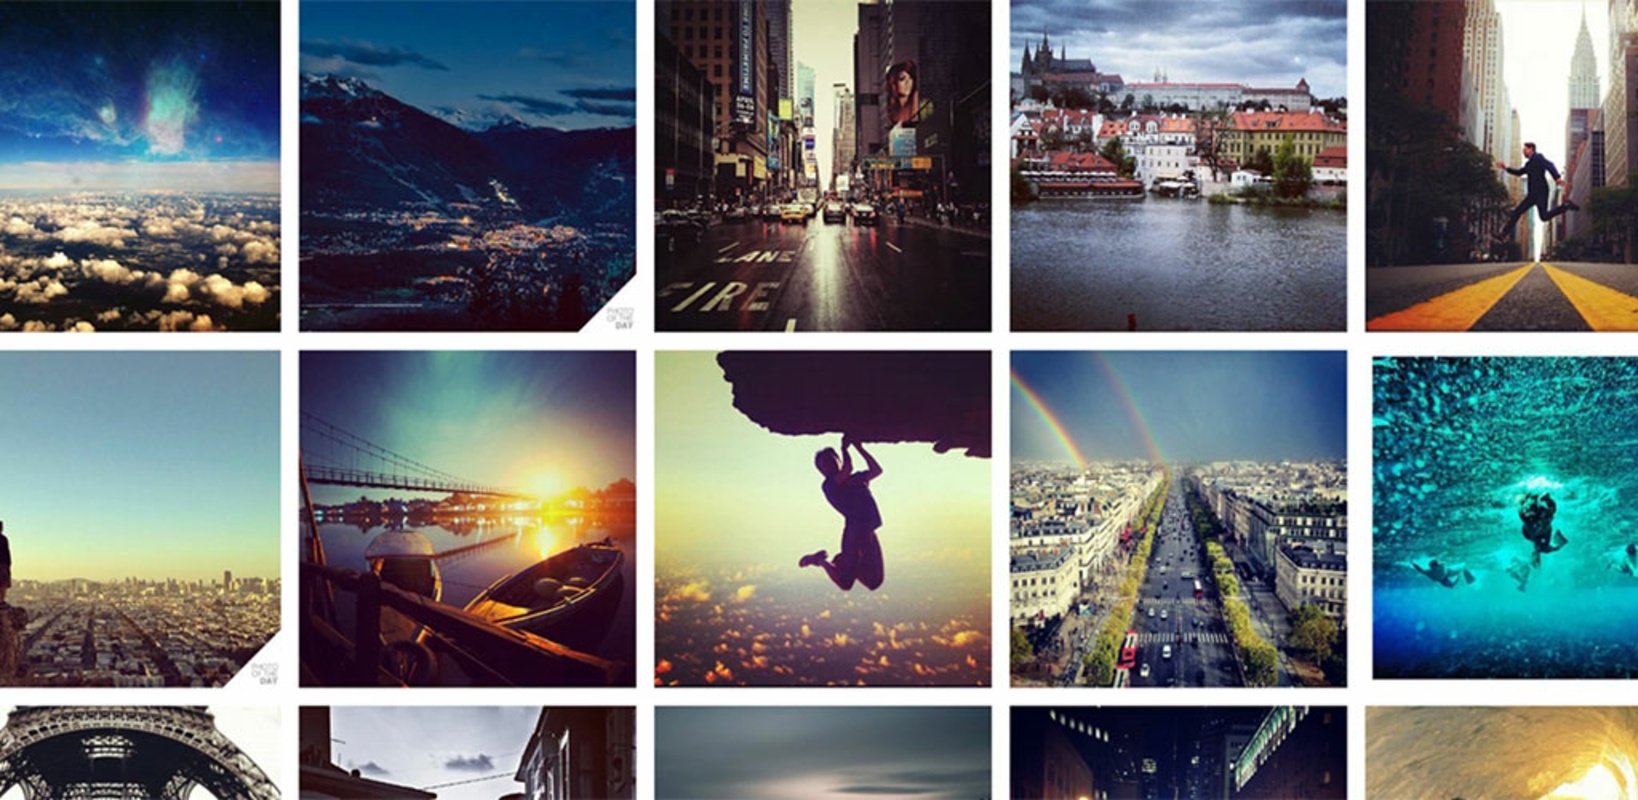 Free Instagram Download 1.0.24.415 feature